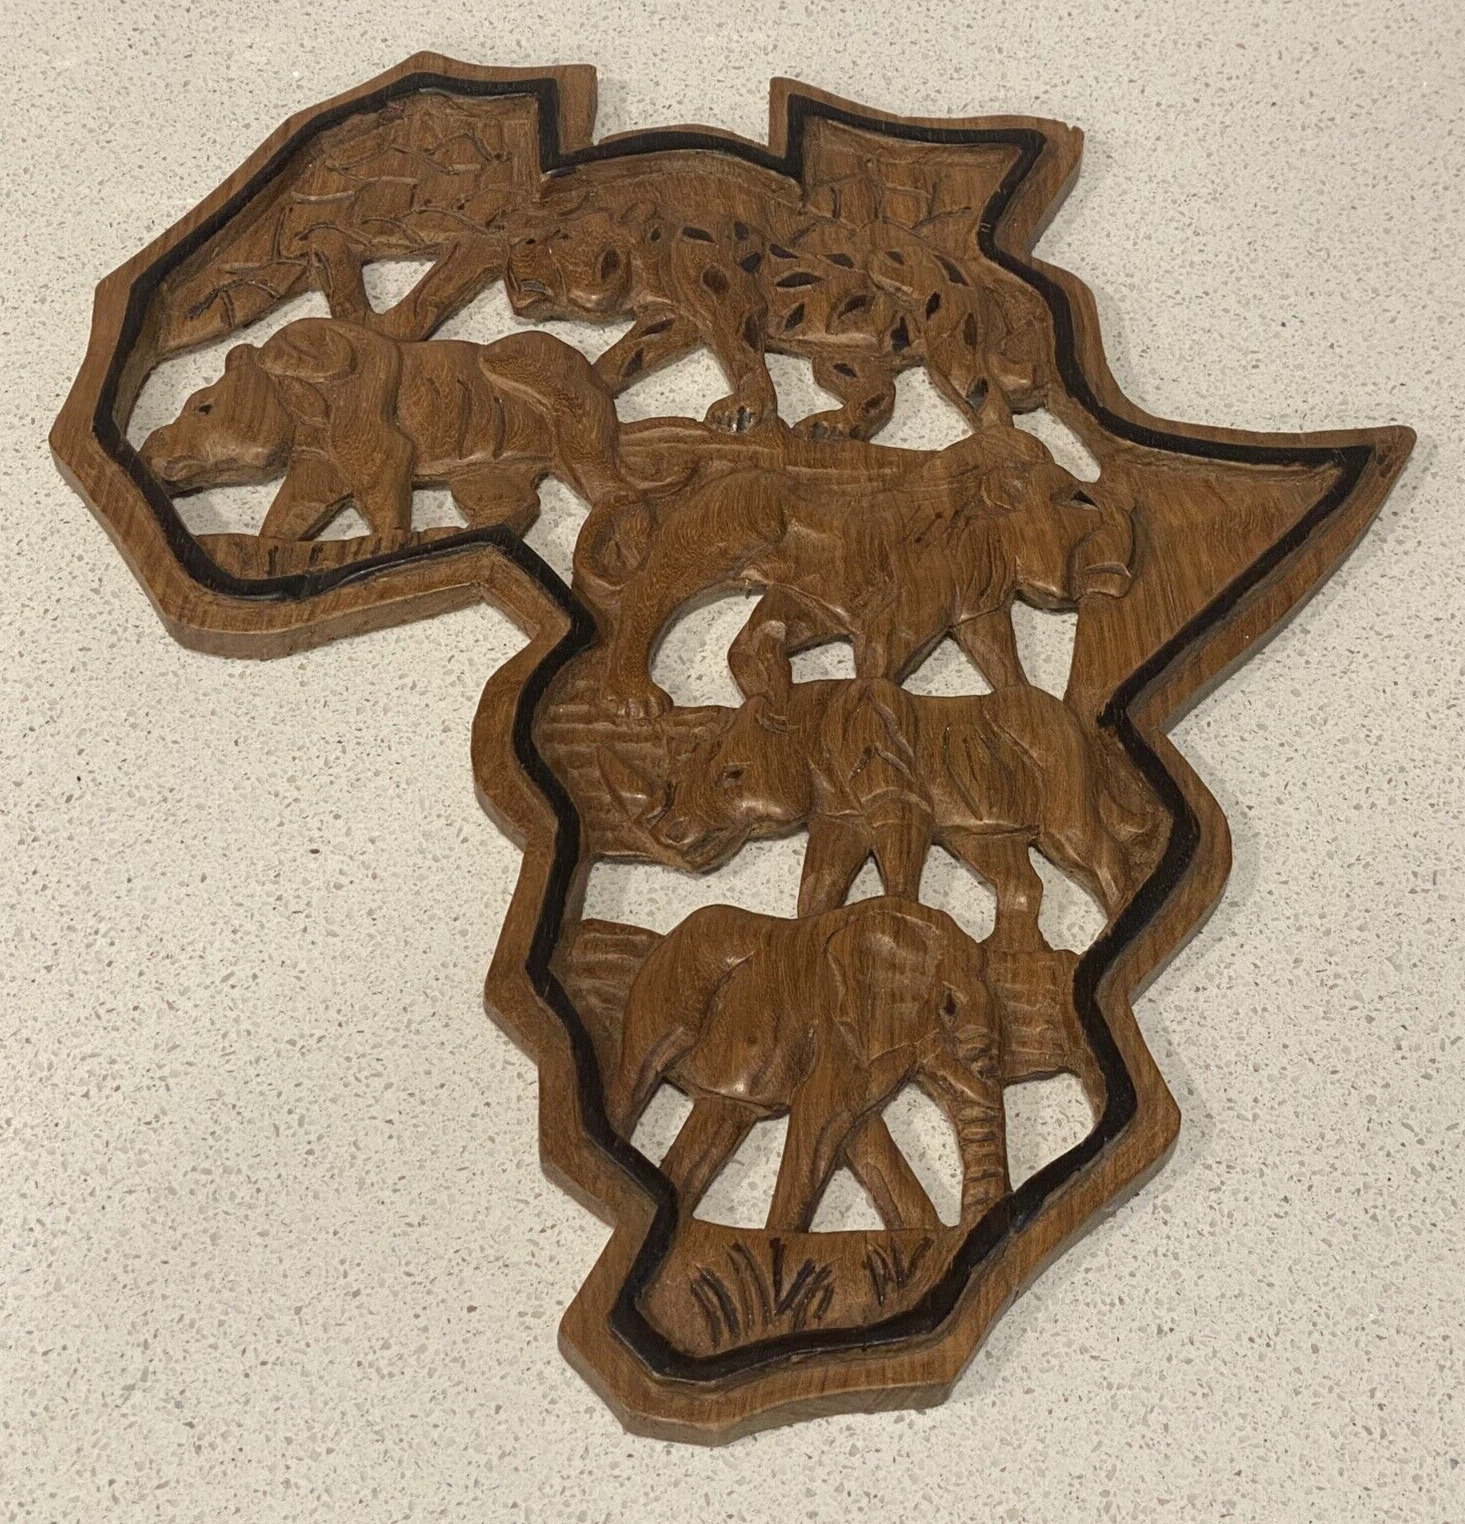 VTG Hand Carved Wood Africa Continent Wall Hanging Artwork Animals Lion Elephant